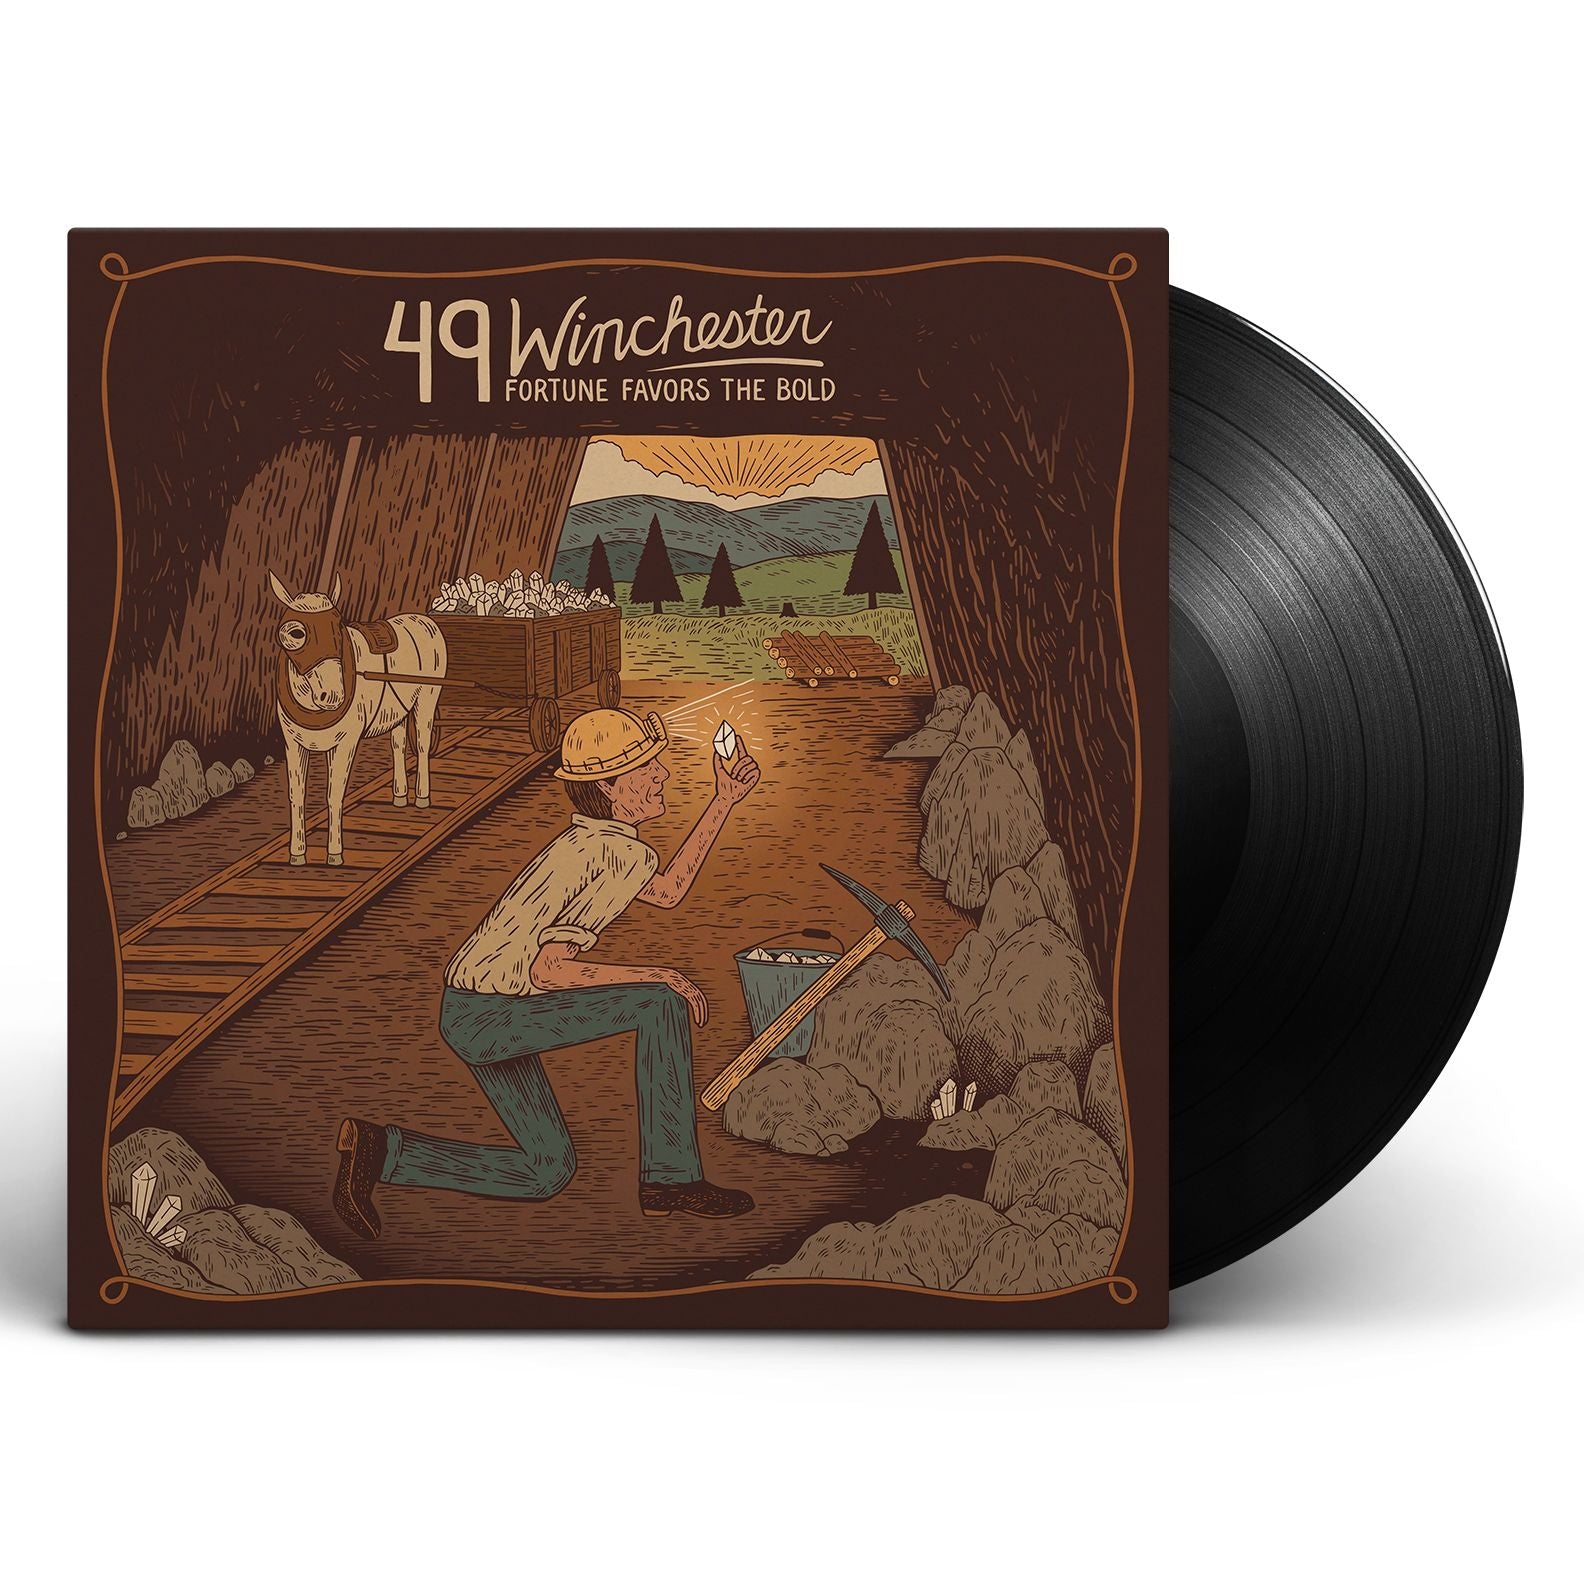 49 Winchester - Fortune Favors the Bold [Vinyl]